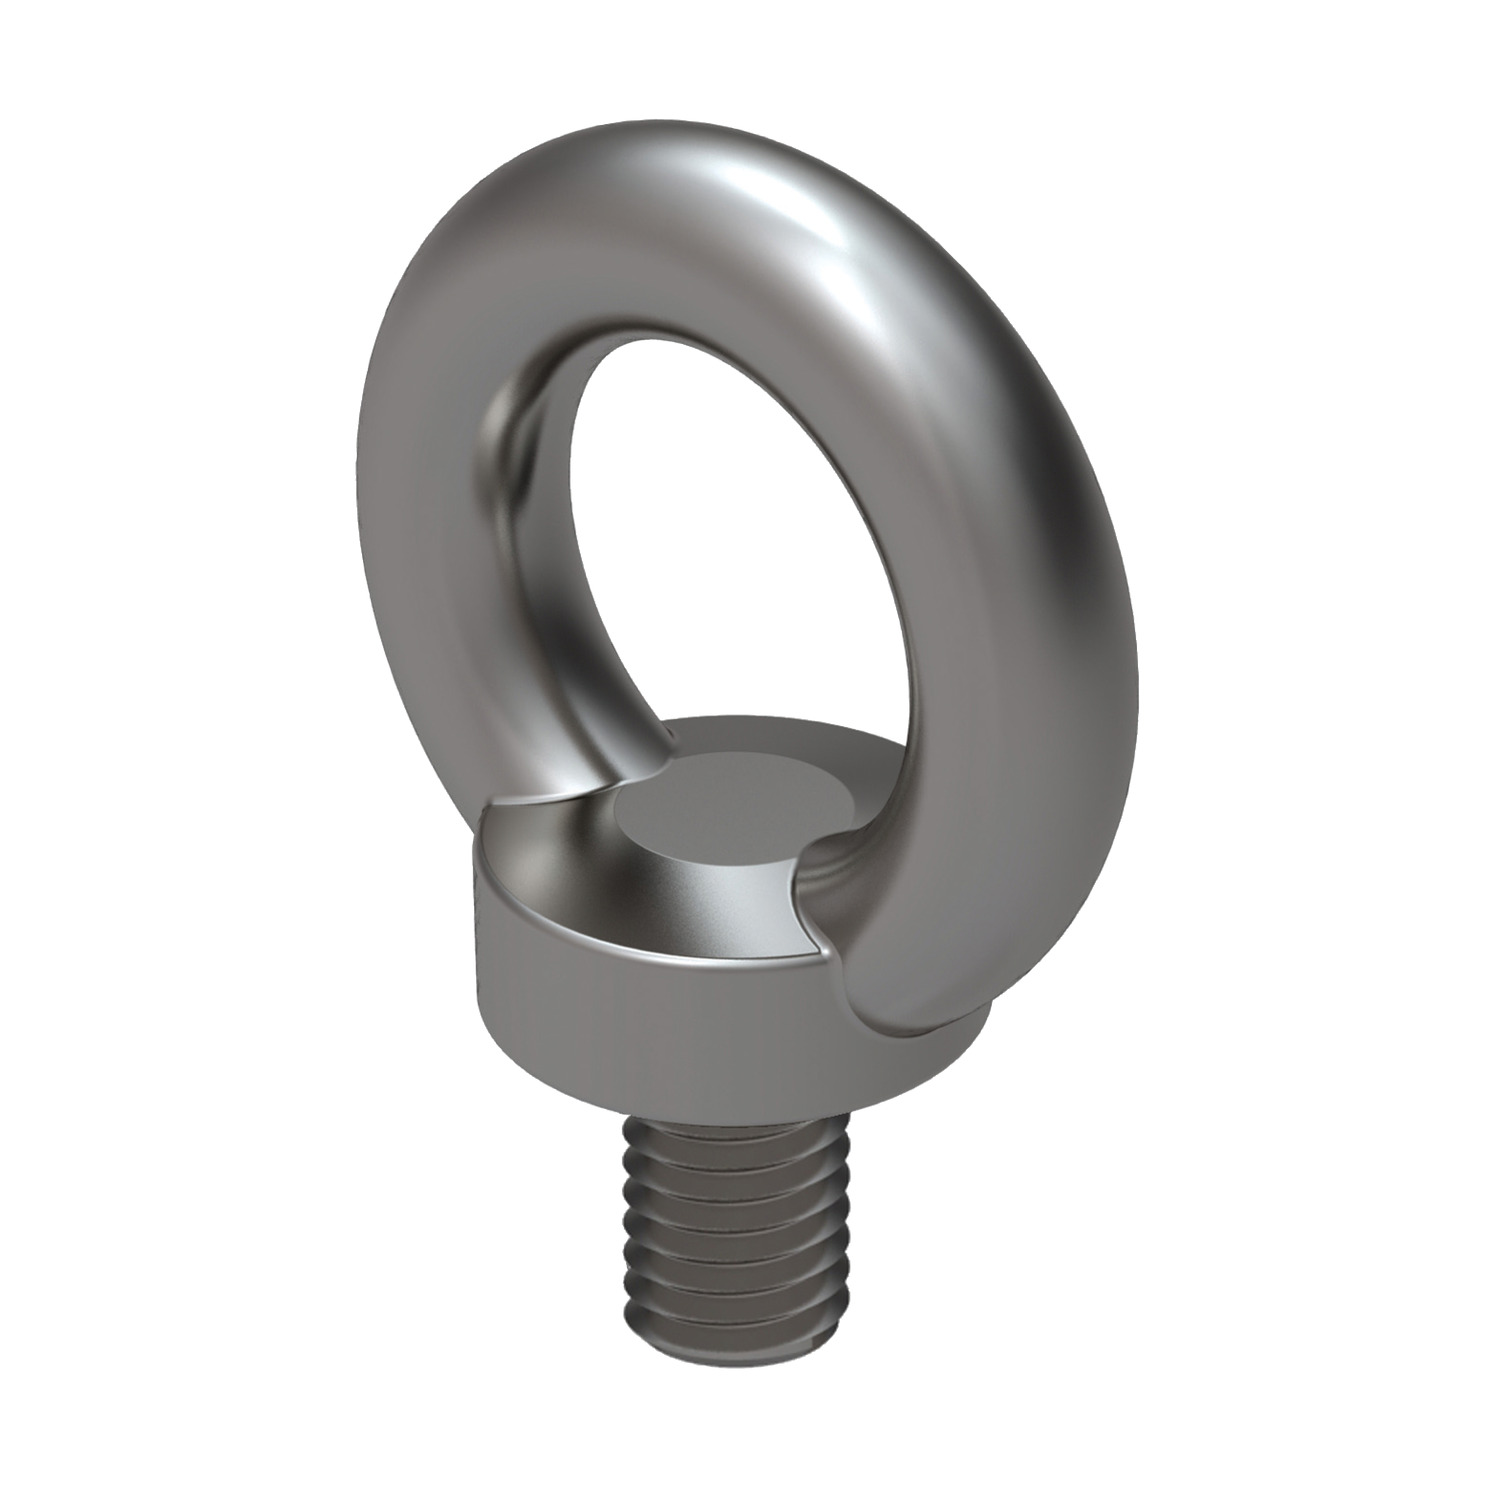 Stainless Male Lifting Eye Bolts Coarse thread male lifting bolt made from stainless steel (A4, AISI 316) to DIN 580 standard. We have inch versions readily available as well.